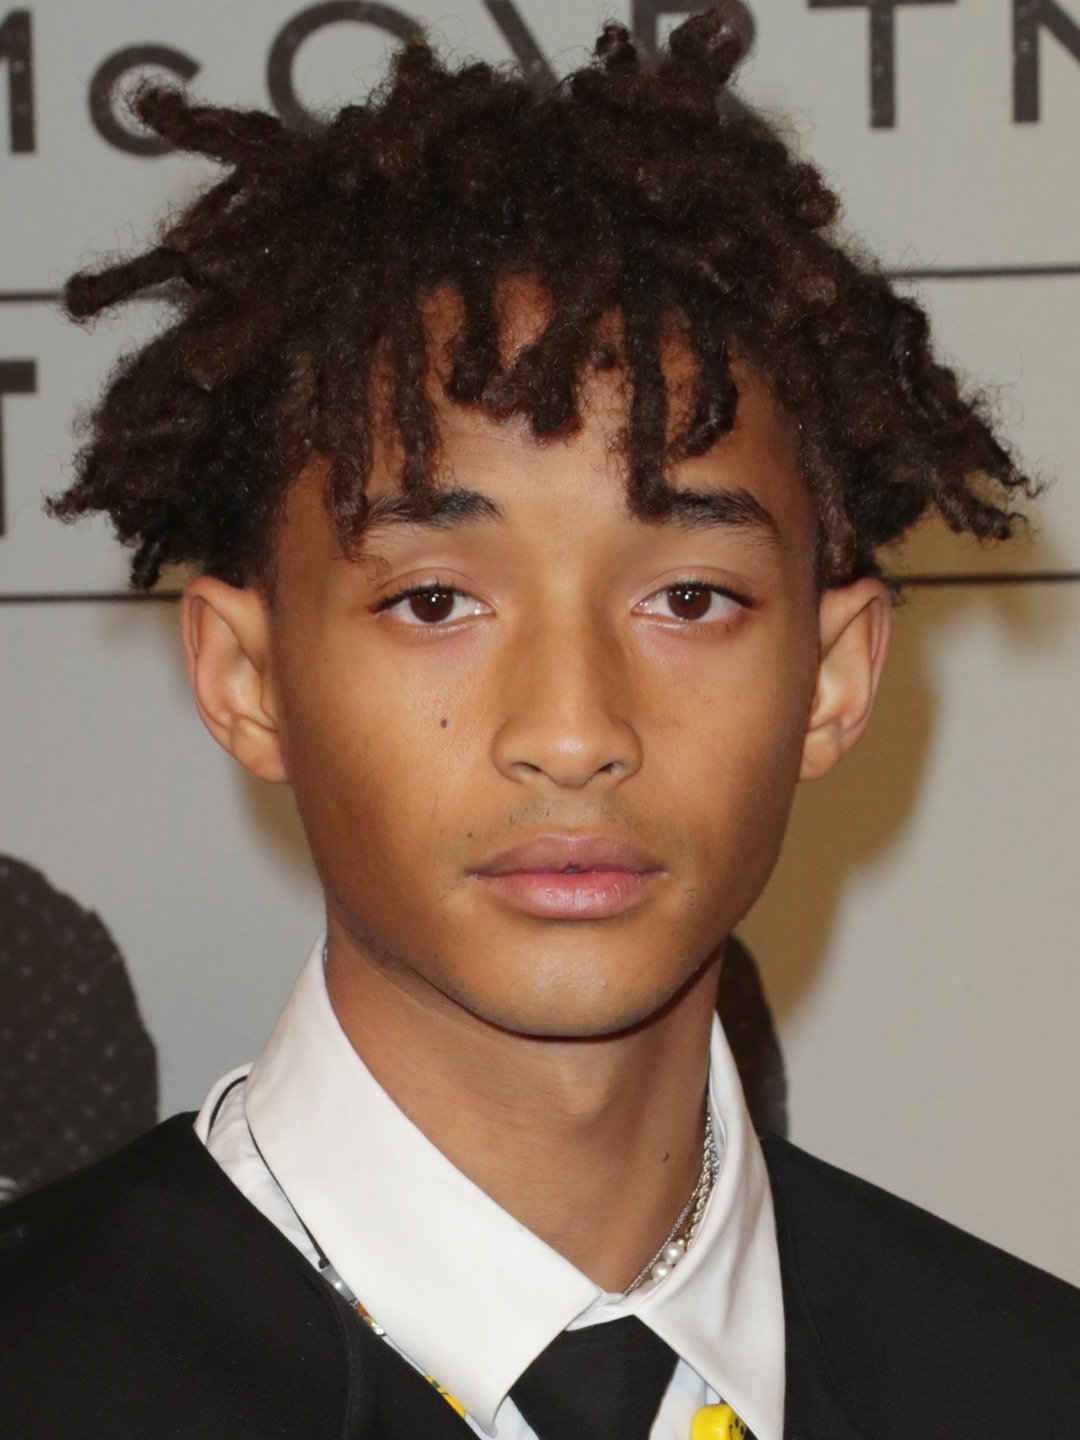 Photo of the Day: Jaden Smith challenges gender norms in new Louis Vuitton  Ad